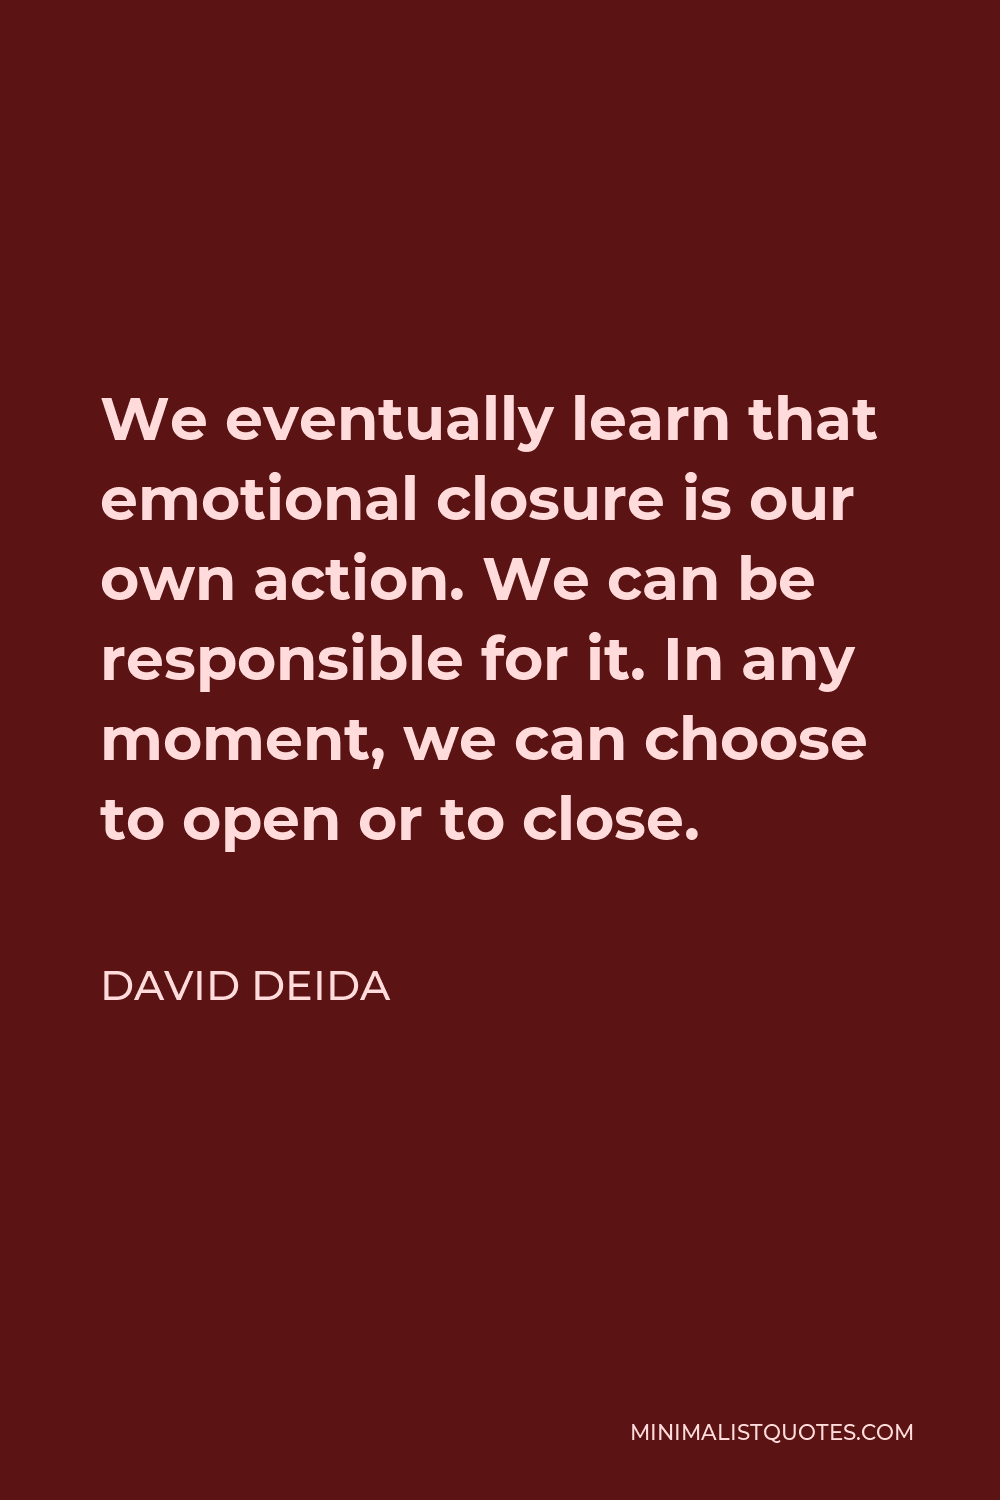 David Deida Quote - We eventually learn that emotional closure is our own action. We can be responsible for it. In any moment, we can choose to open or to close.